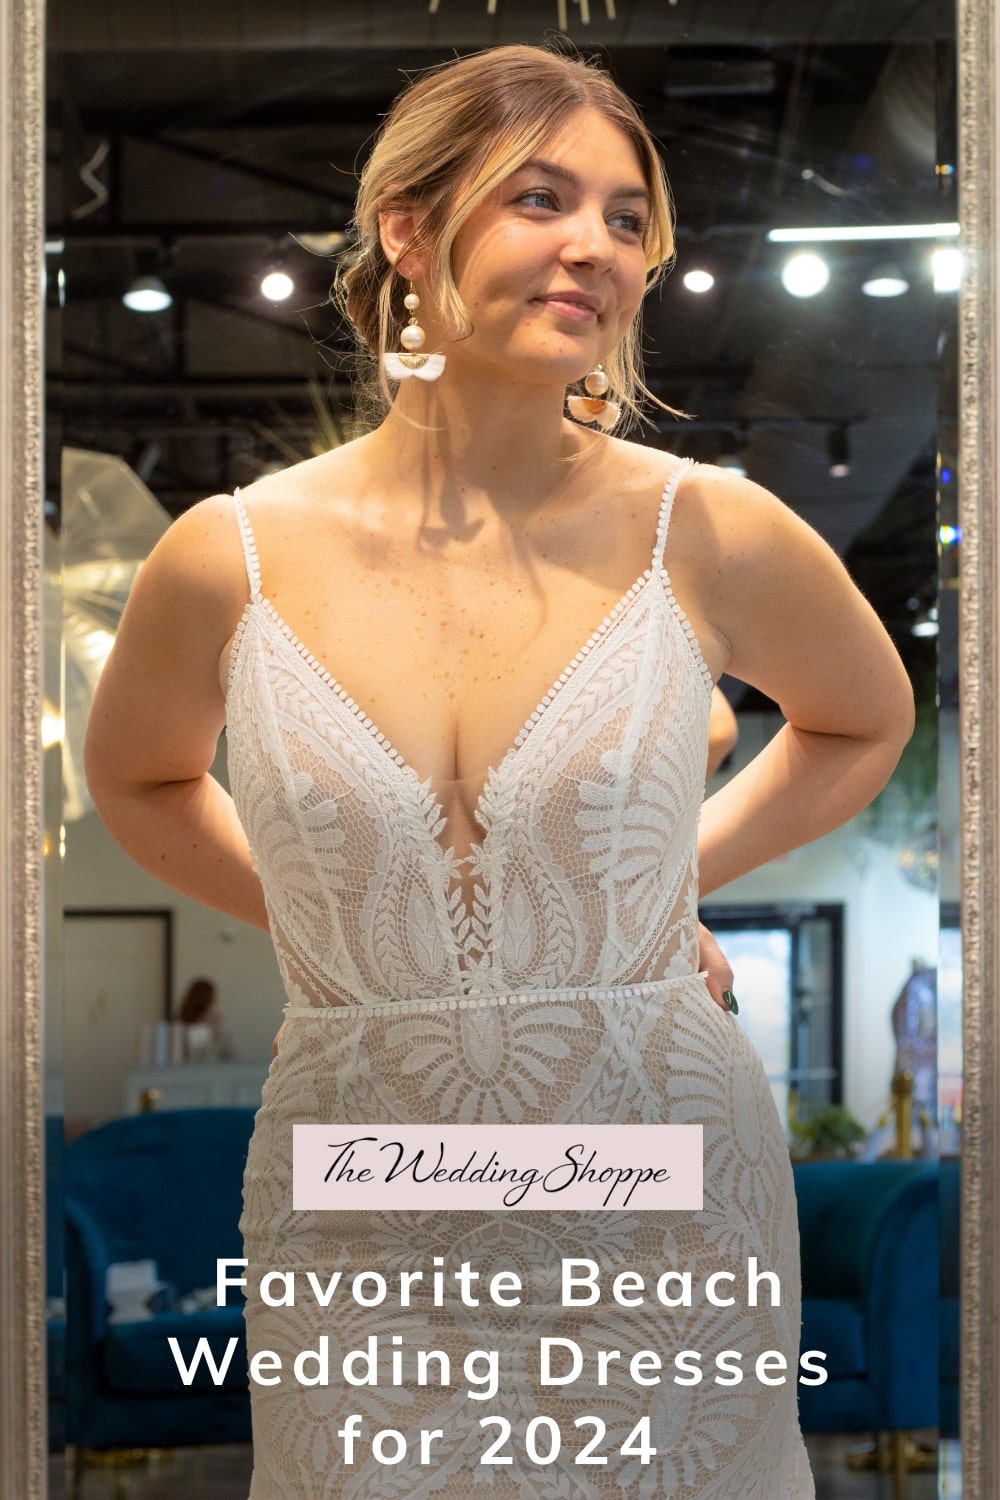 pinnable graphic for "Favorite Beach Wedding Dresses for 2024" from The Wedding Shoppe